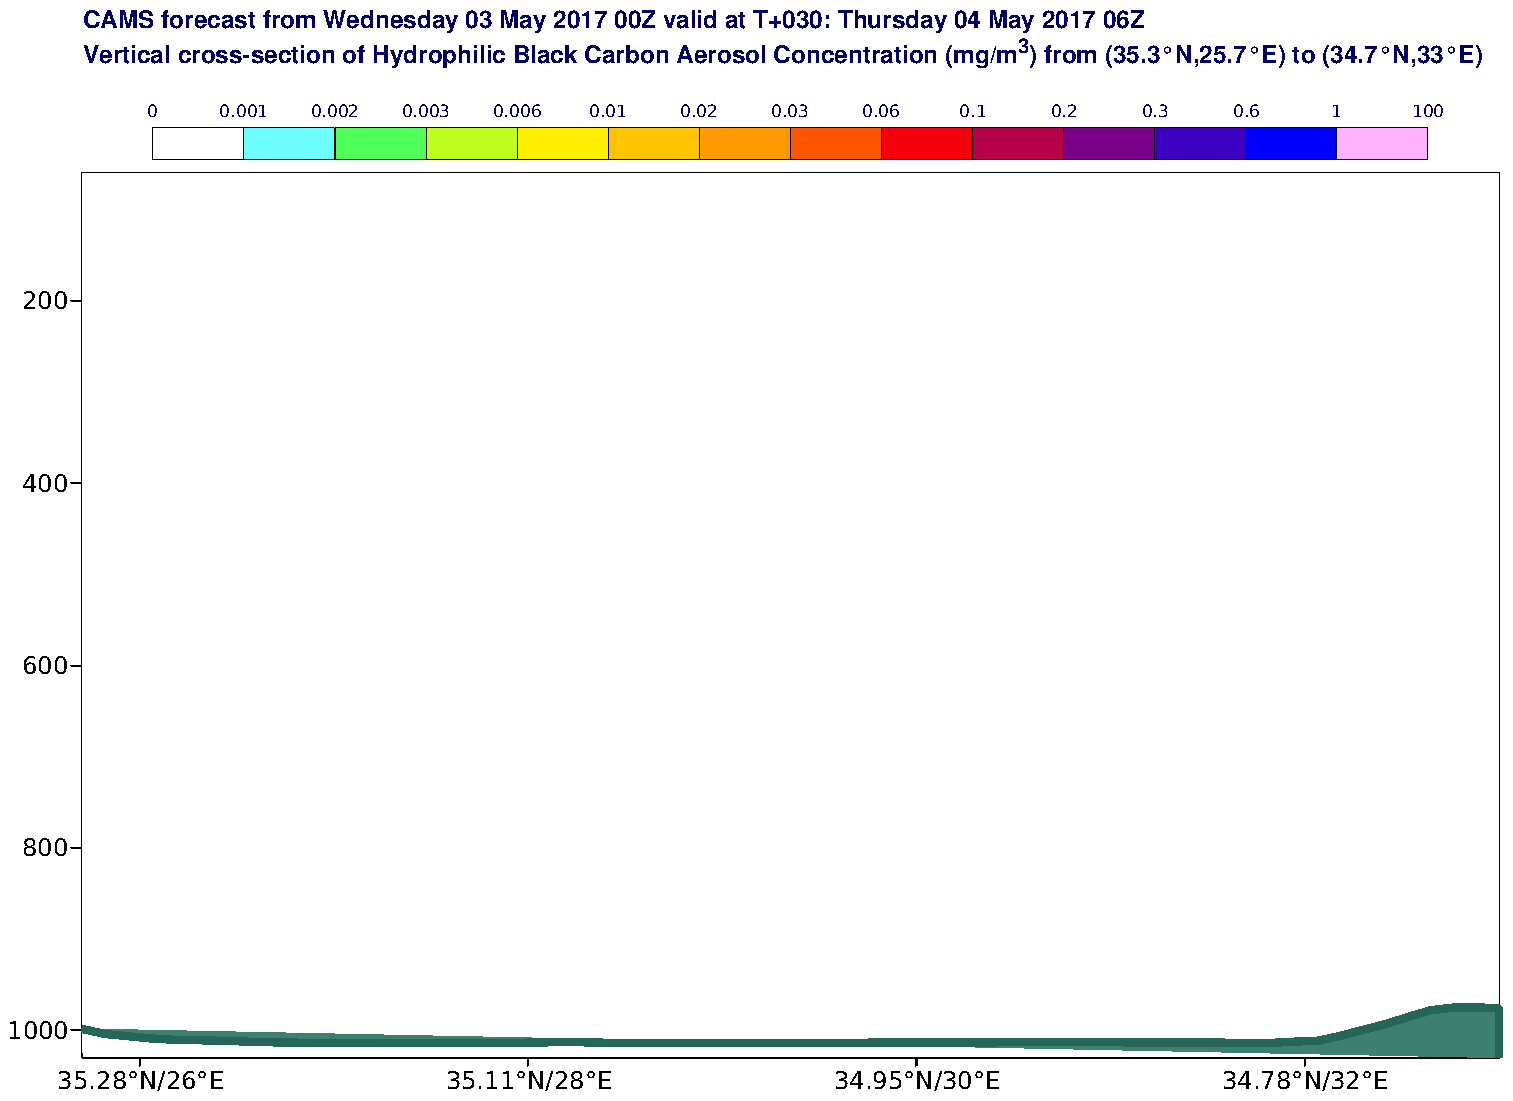 Vertical cross-section of Hydrophilic Black Carbon Aerosol Concentration (mg/m3) valid at T30 - 2017-05-04 06:00